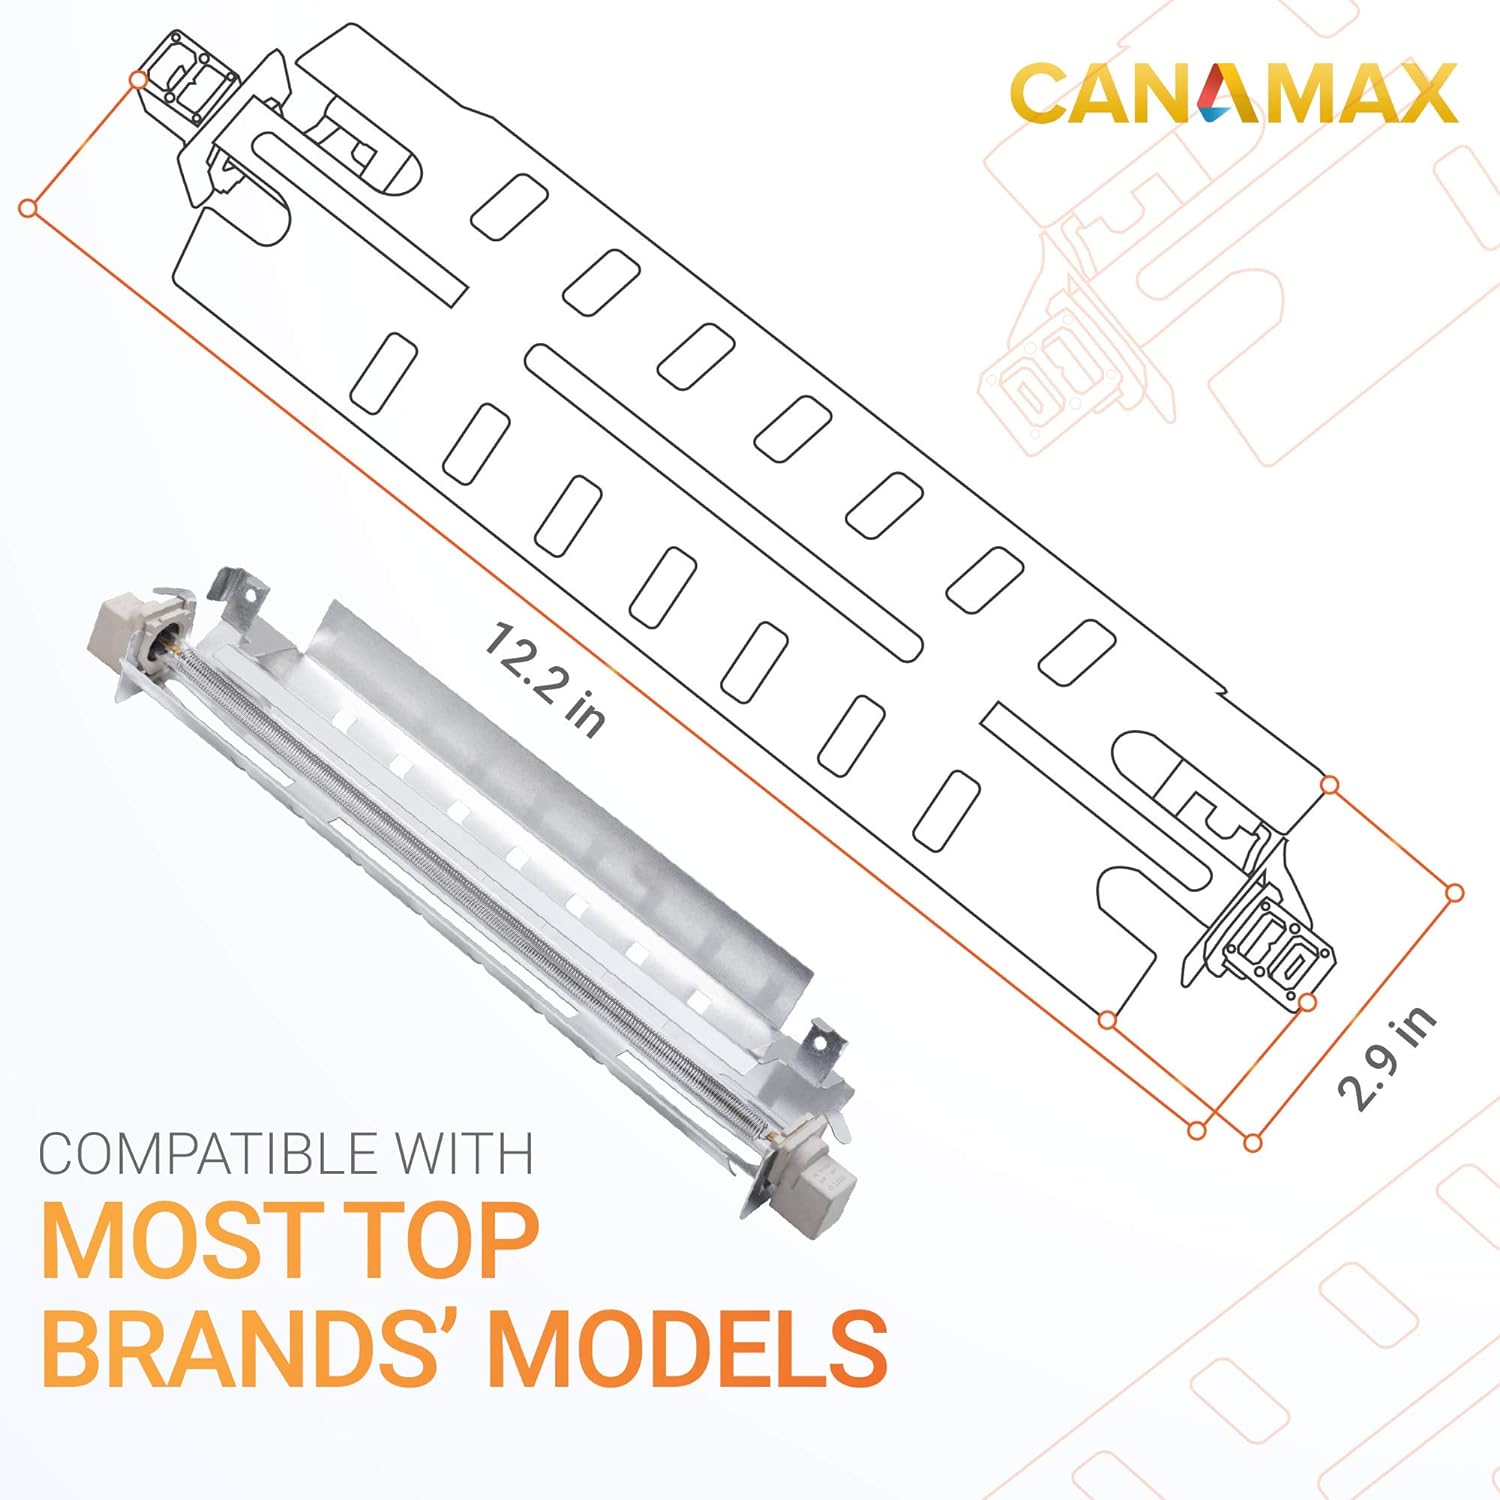 Canamax [Upgraded] WR51X10055 Defrost Heater Heating Element Assembly Premium Replacement Part  - Compatible with GE Hotpoint Refrigera